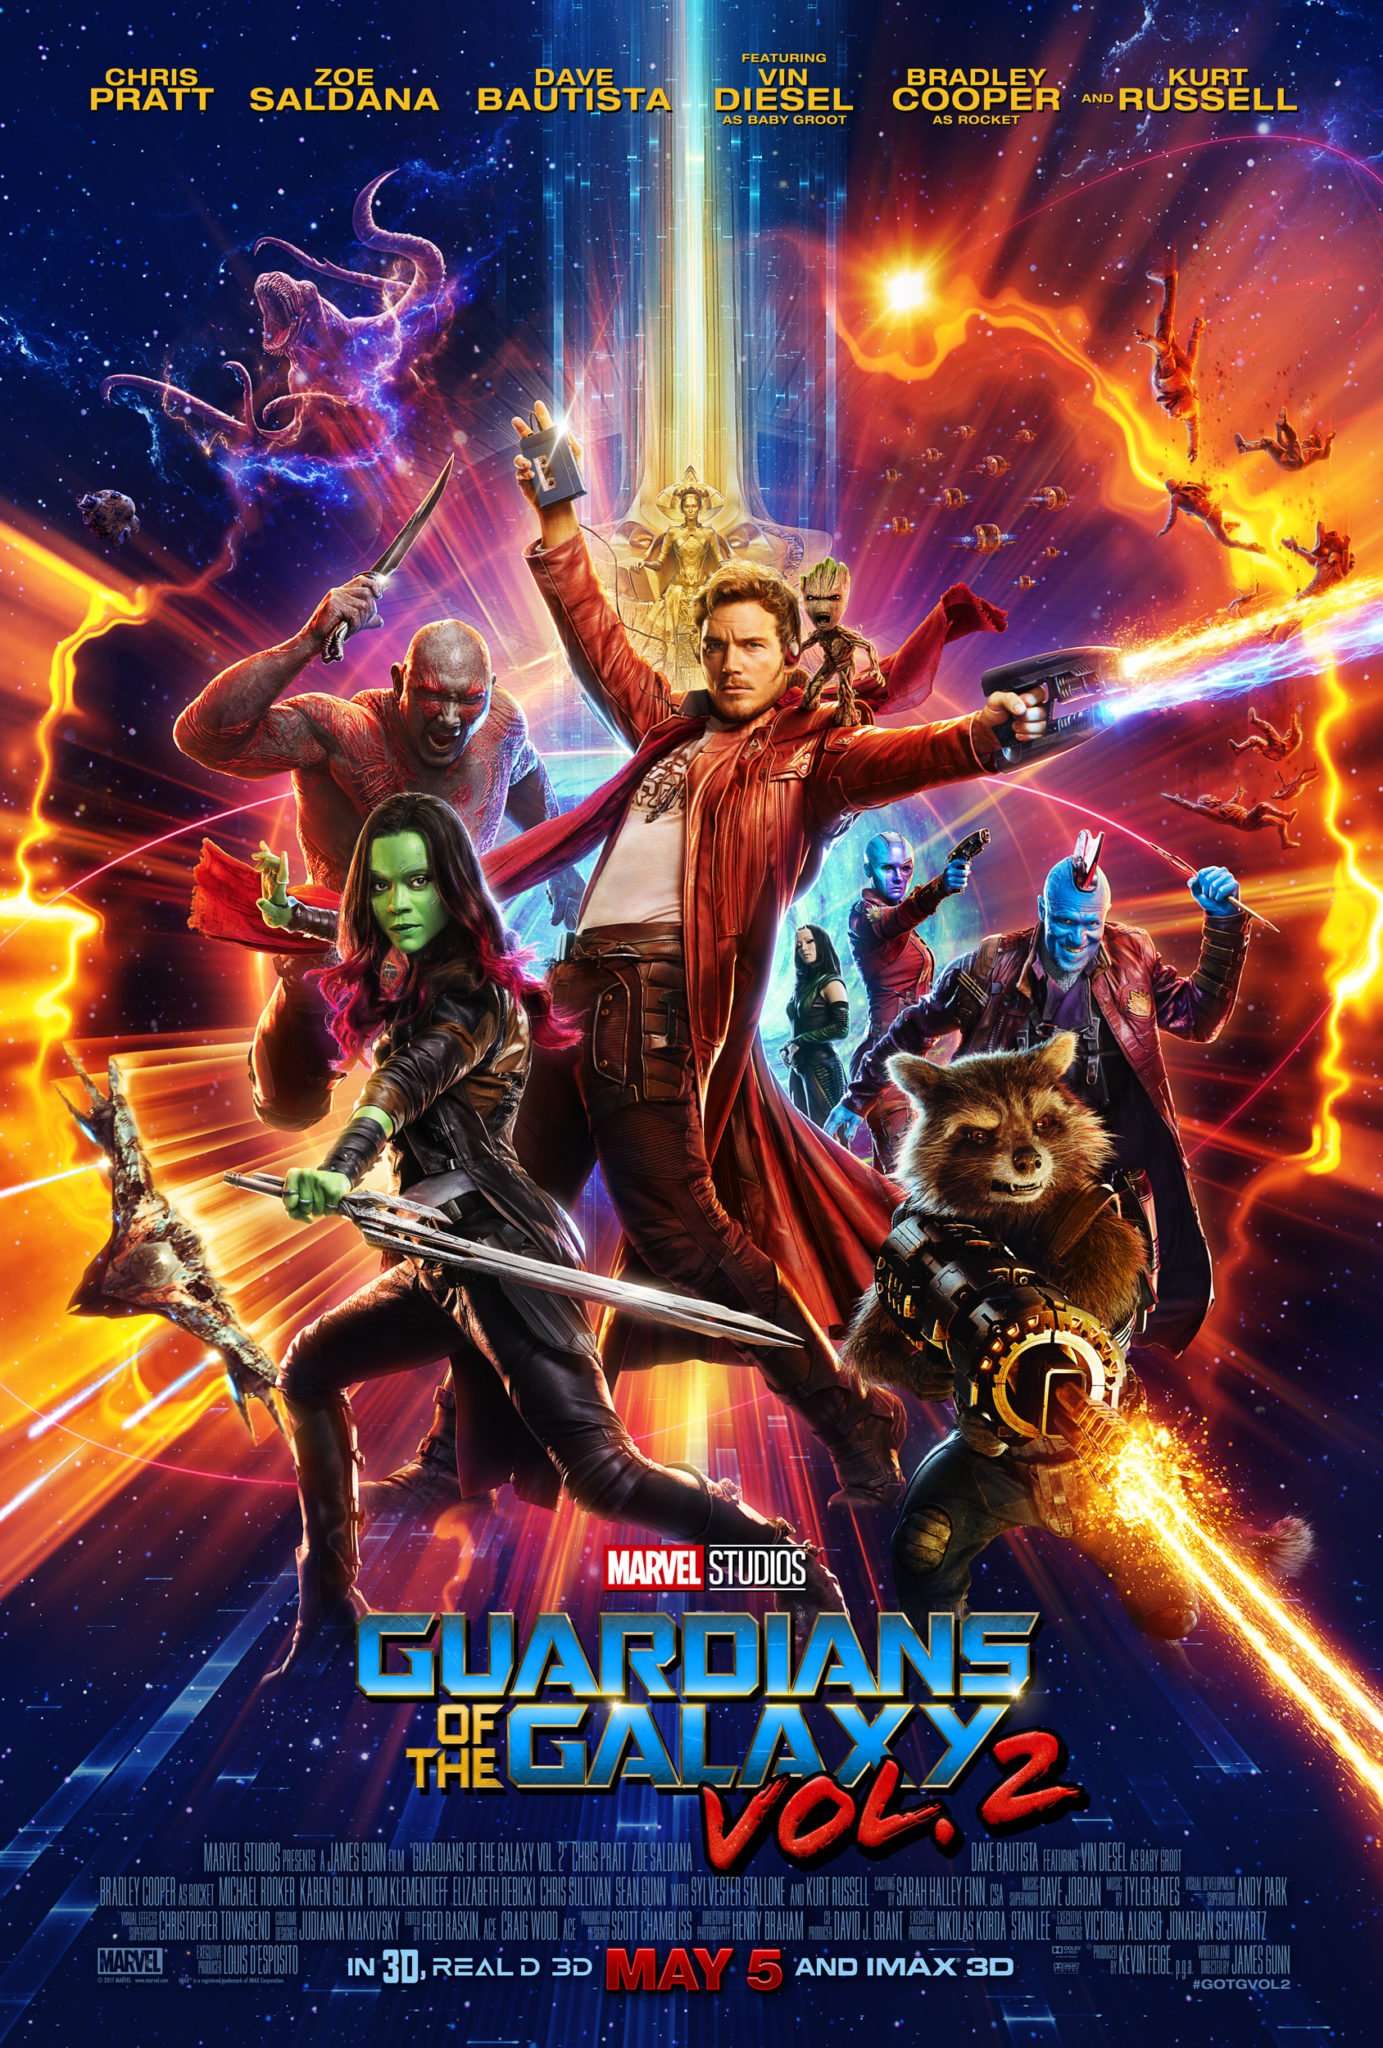 Guardians of the Galaxy Vol. 2 Movie Review #GotGVol2